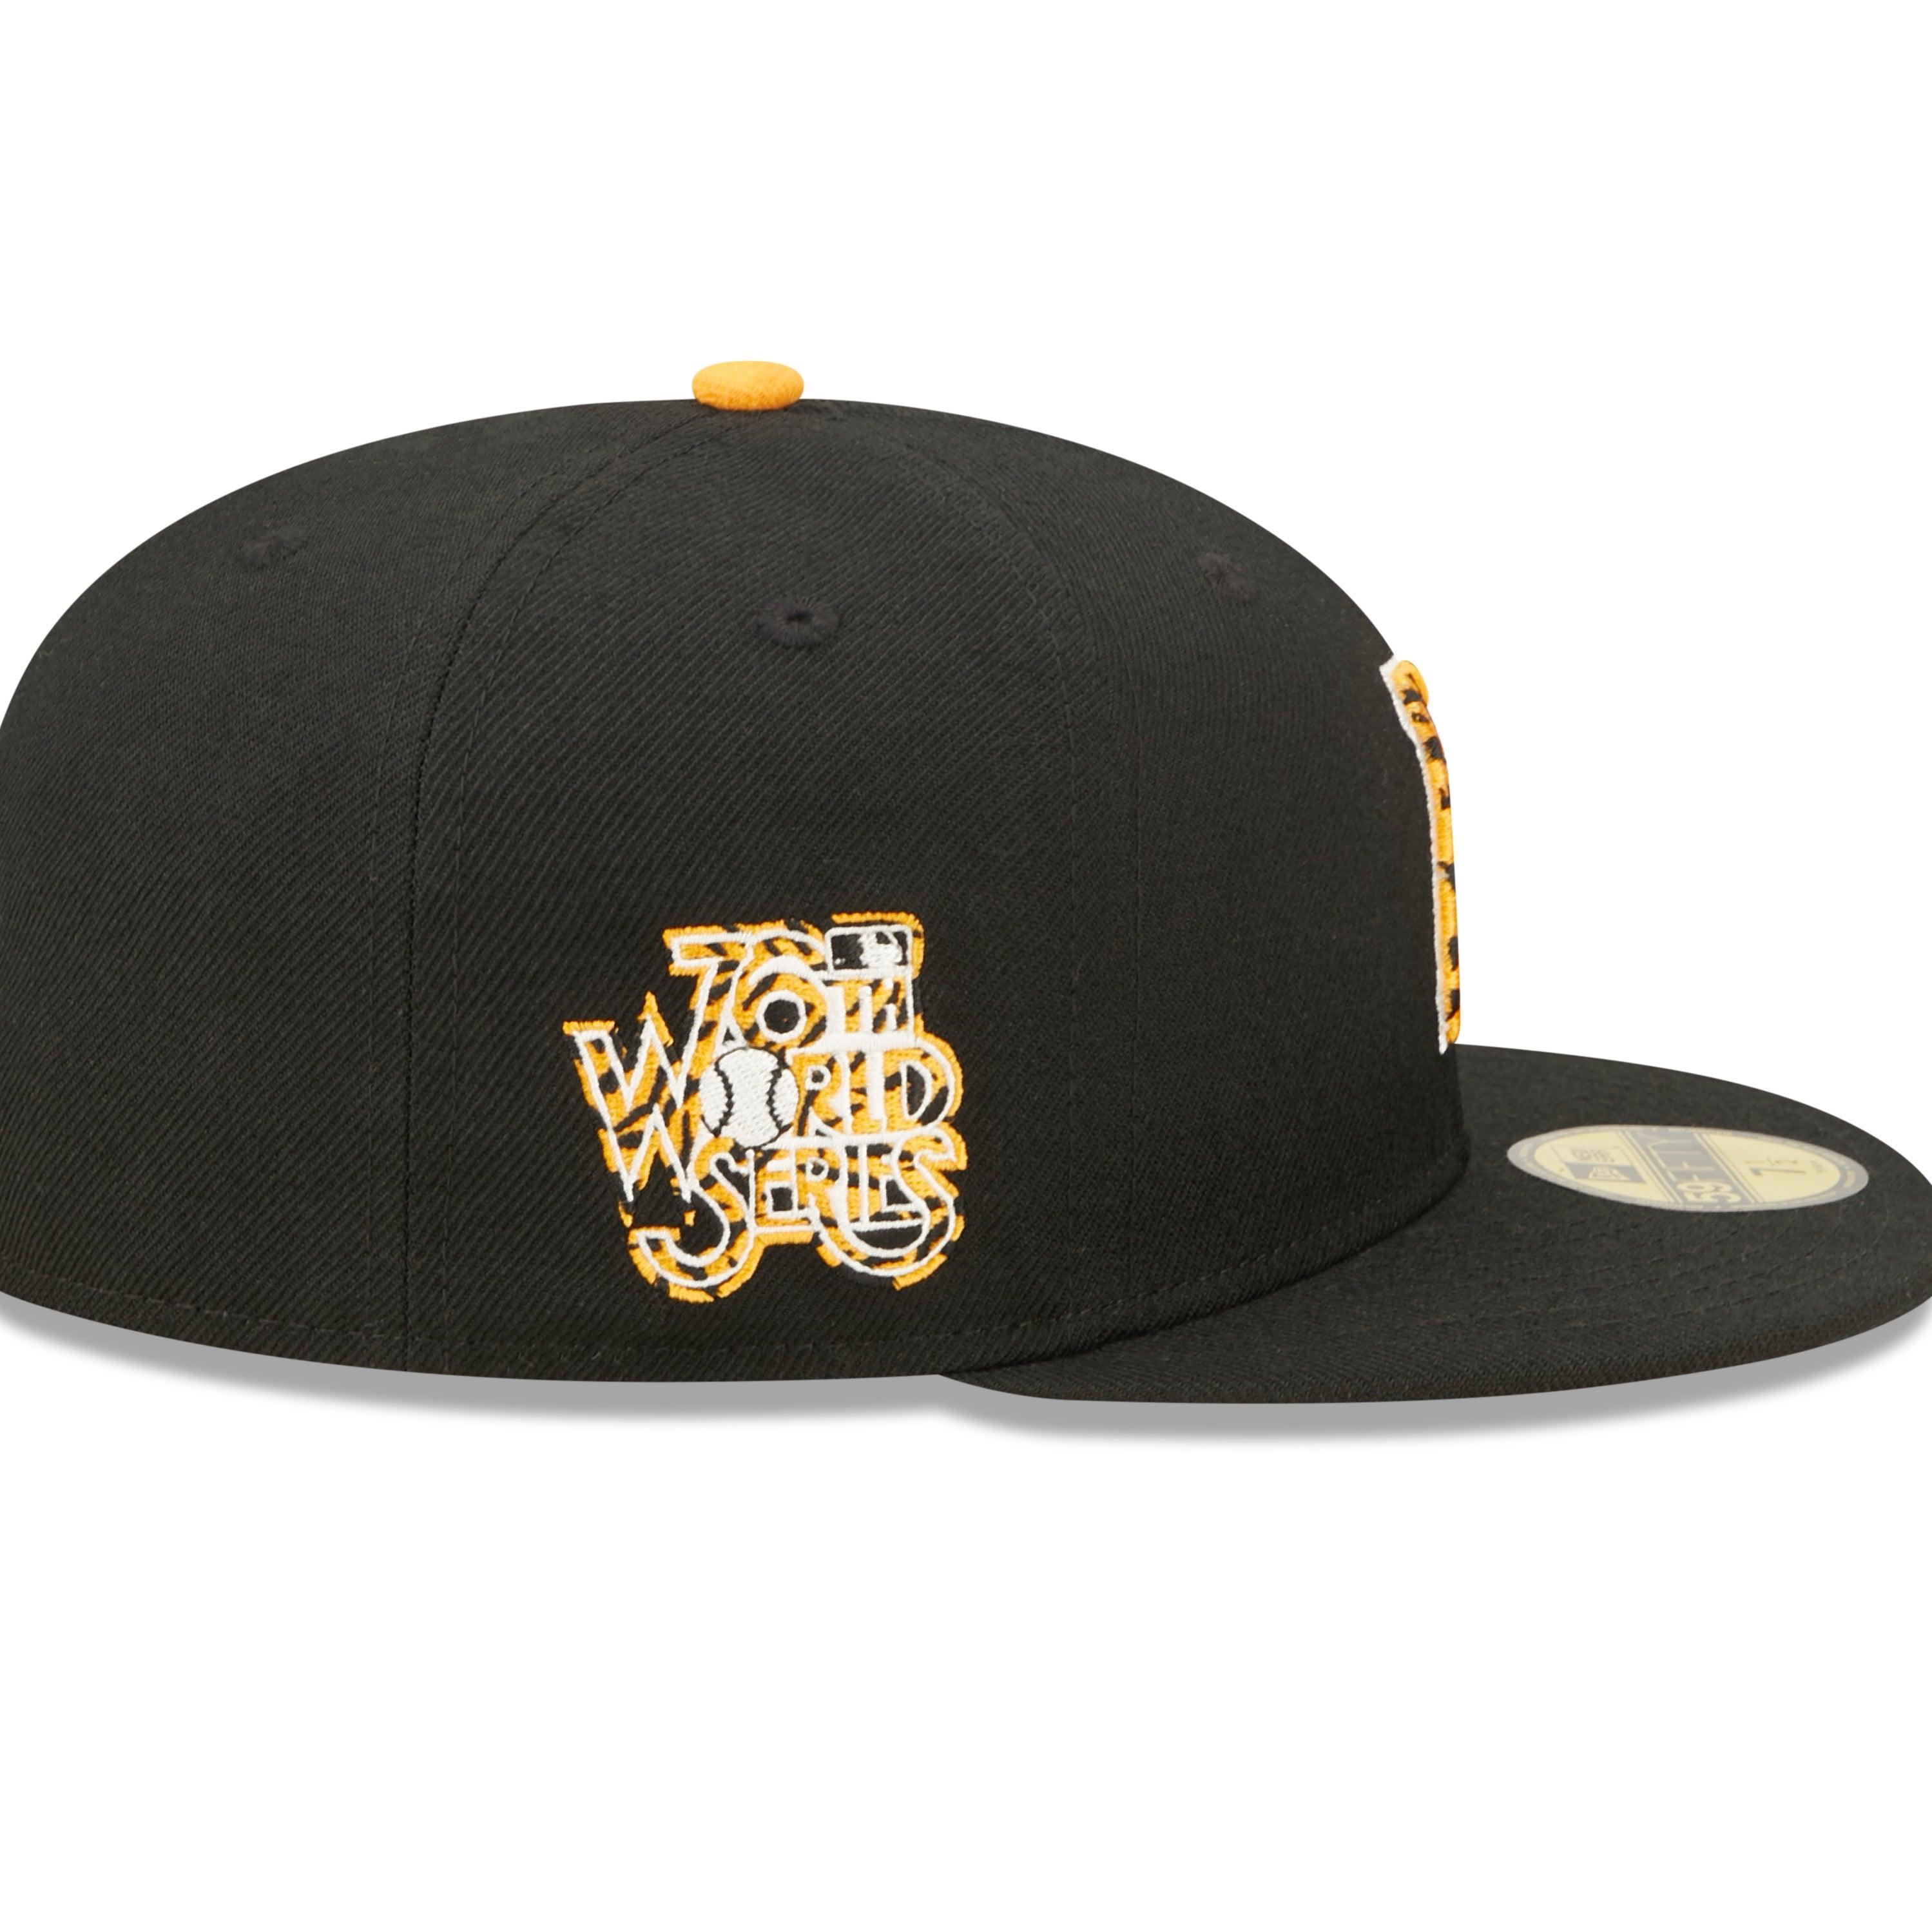 NEW ERA 59FIFTY WORLD SERIES 1976 MLB PITTSBURGH PIRATES TIGERFILL FITTED CAP - FAM